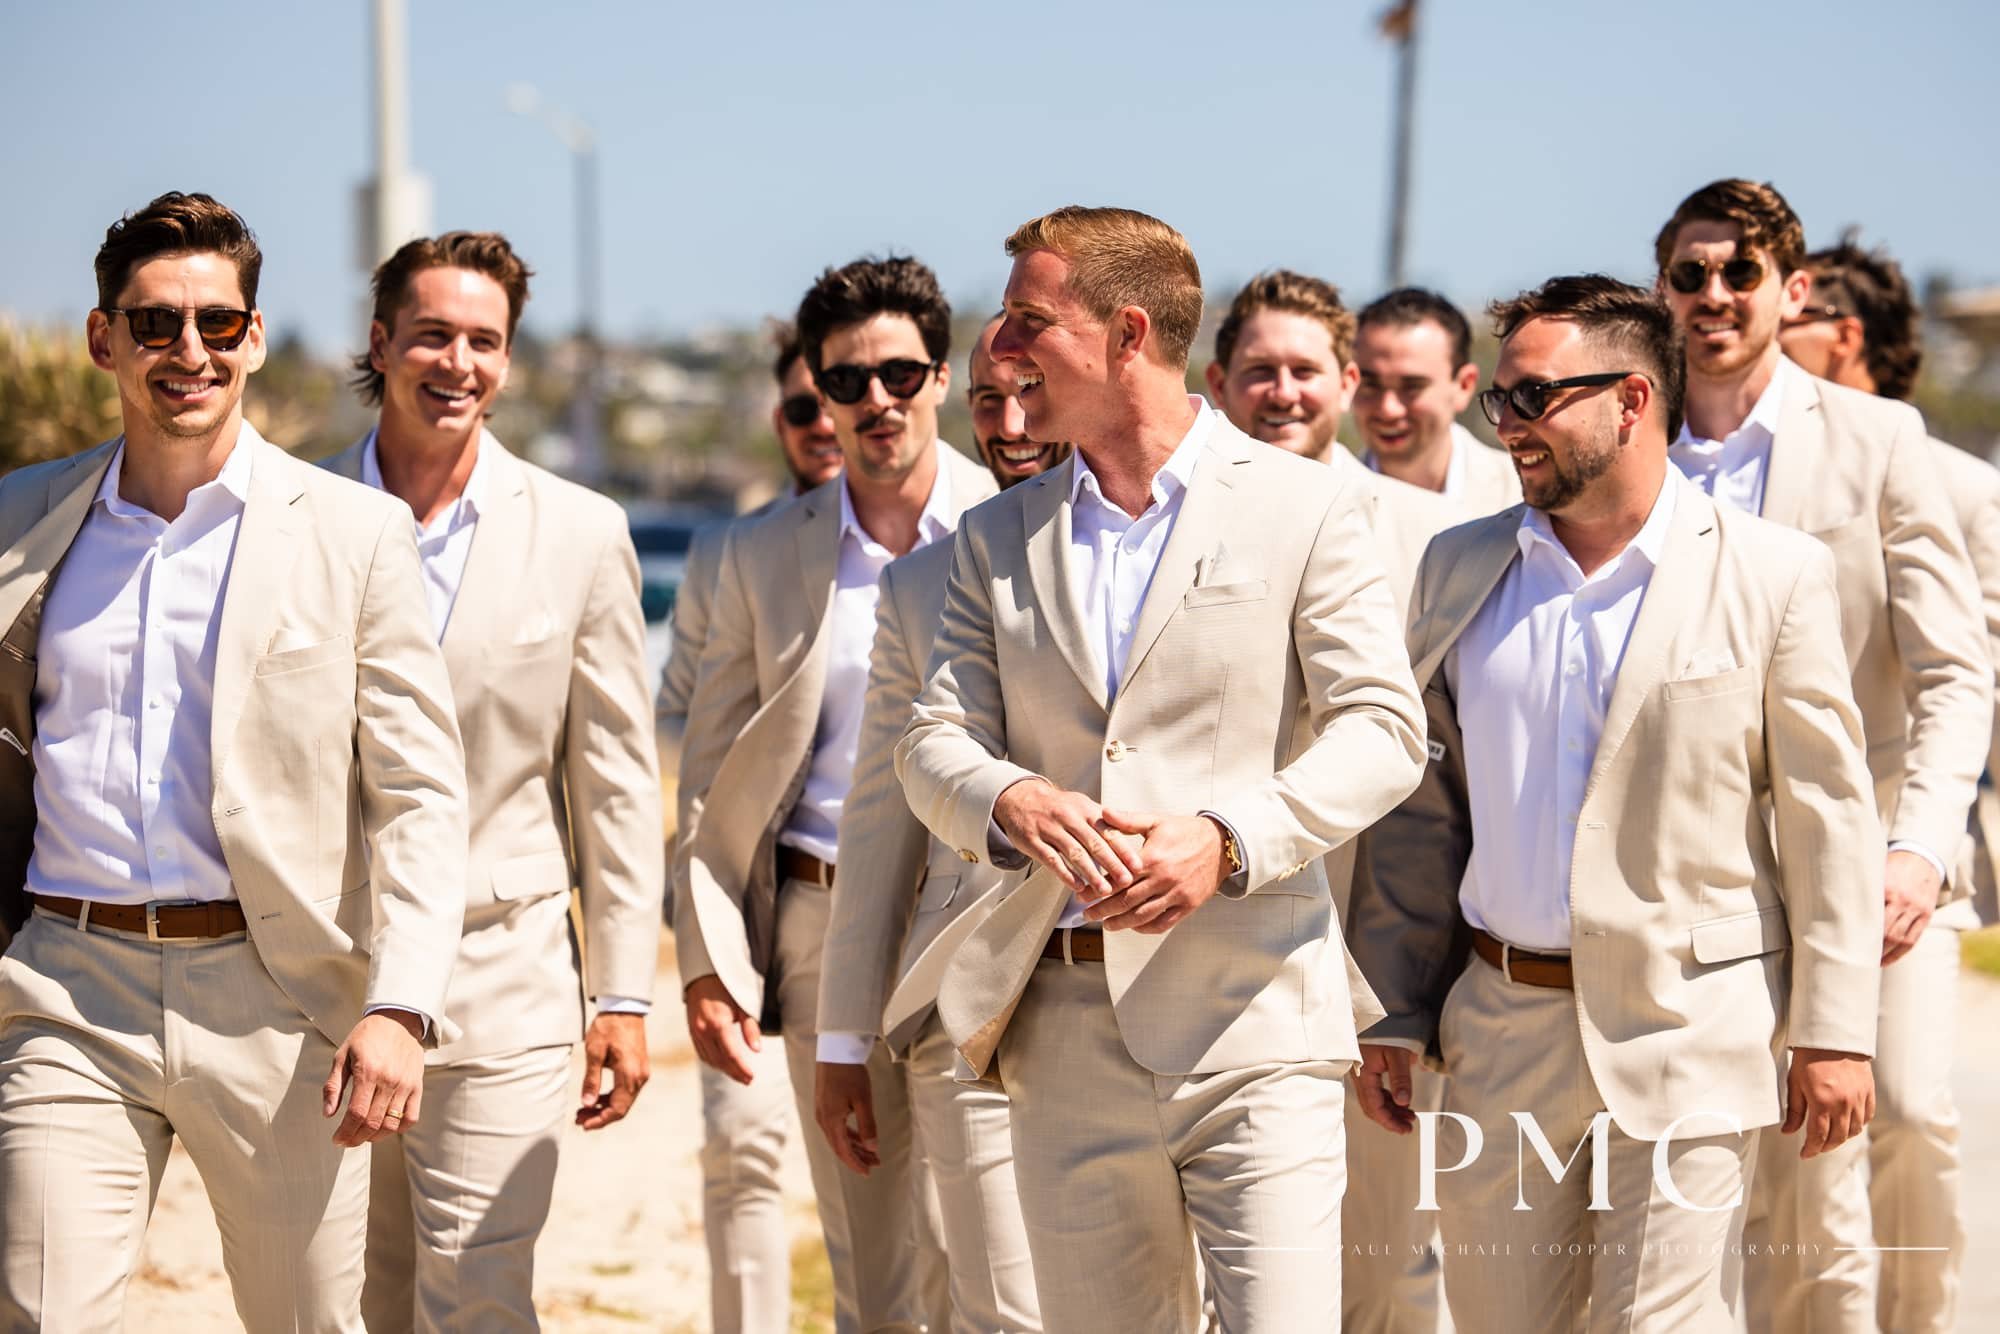 A groom and his groomsmen walk and smile at each other on the beach in Mission Bay.